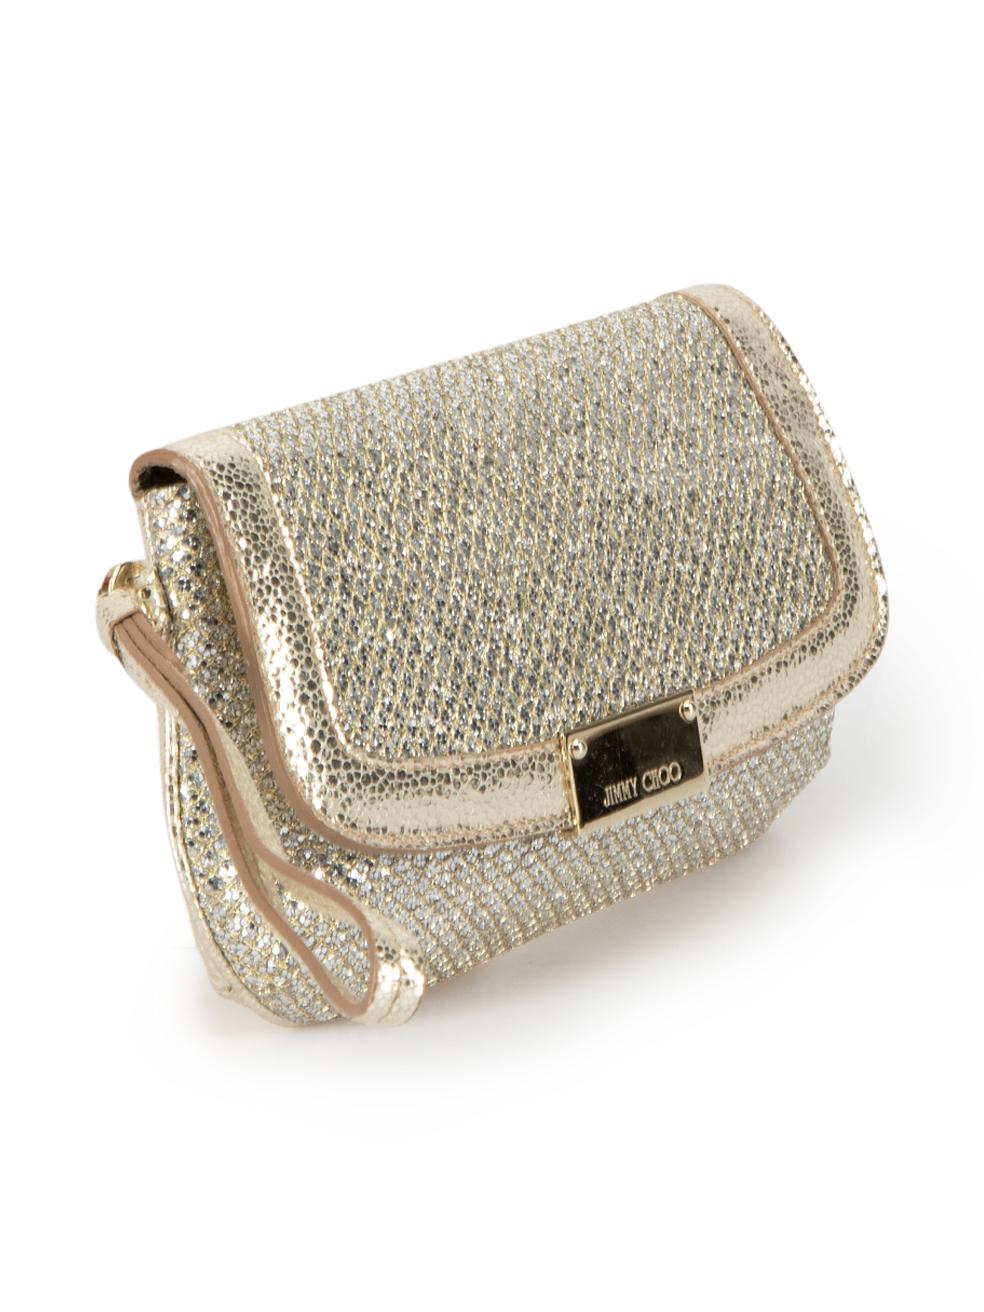 CONDITION is Very good. Minimal wear to clutch is evident. Minimal wear to interior lining where colour marks is evident. Minor pilling to edge of wristlet handle is visible on this used Jimmy Choo designer resale